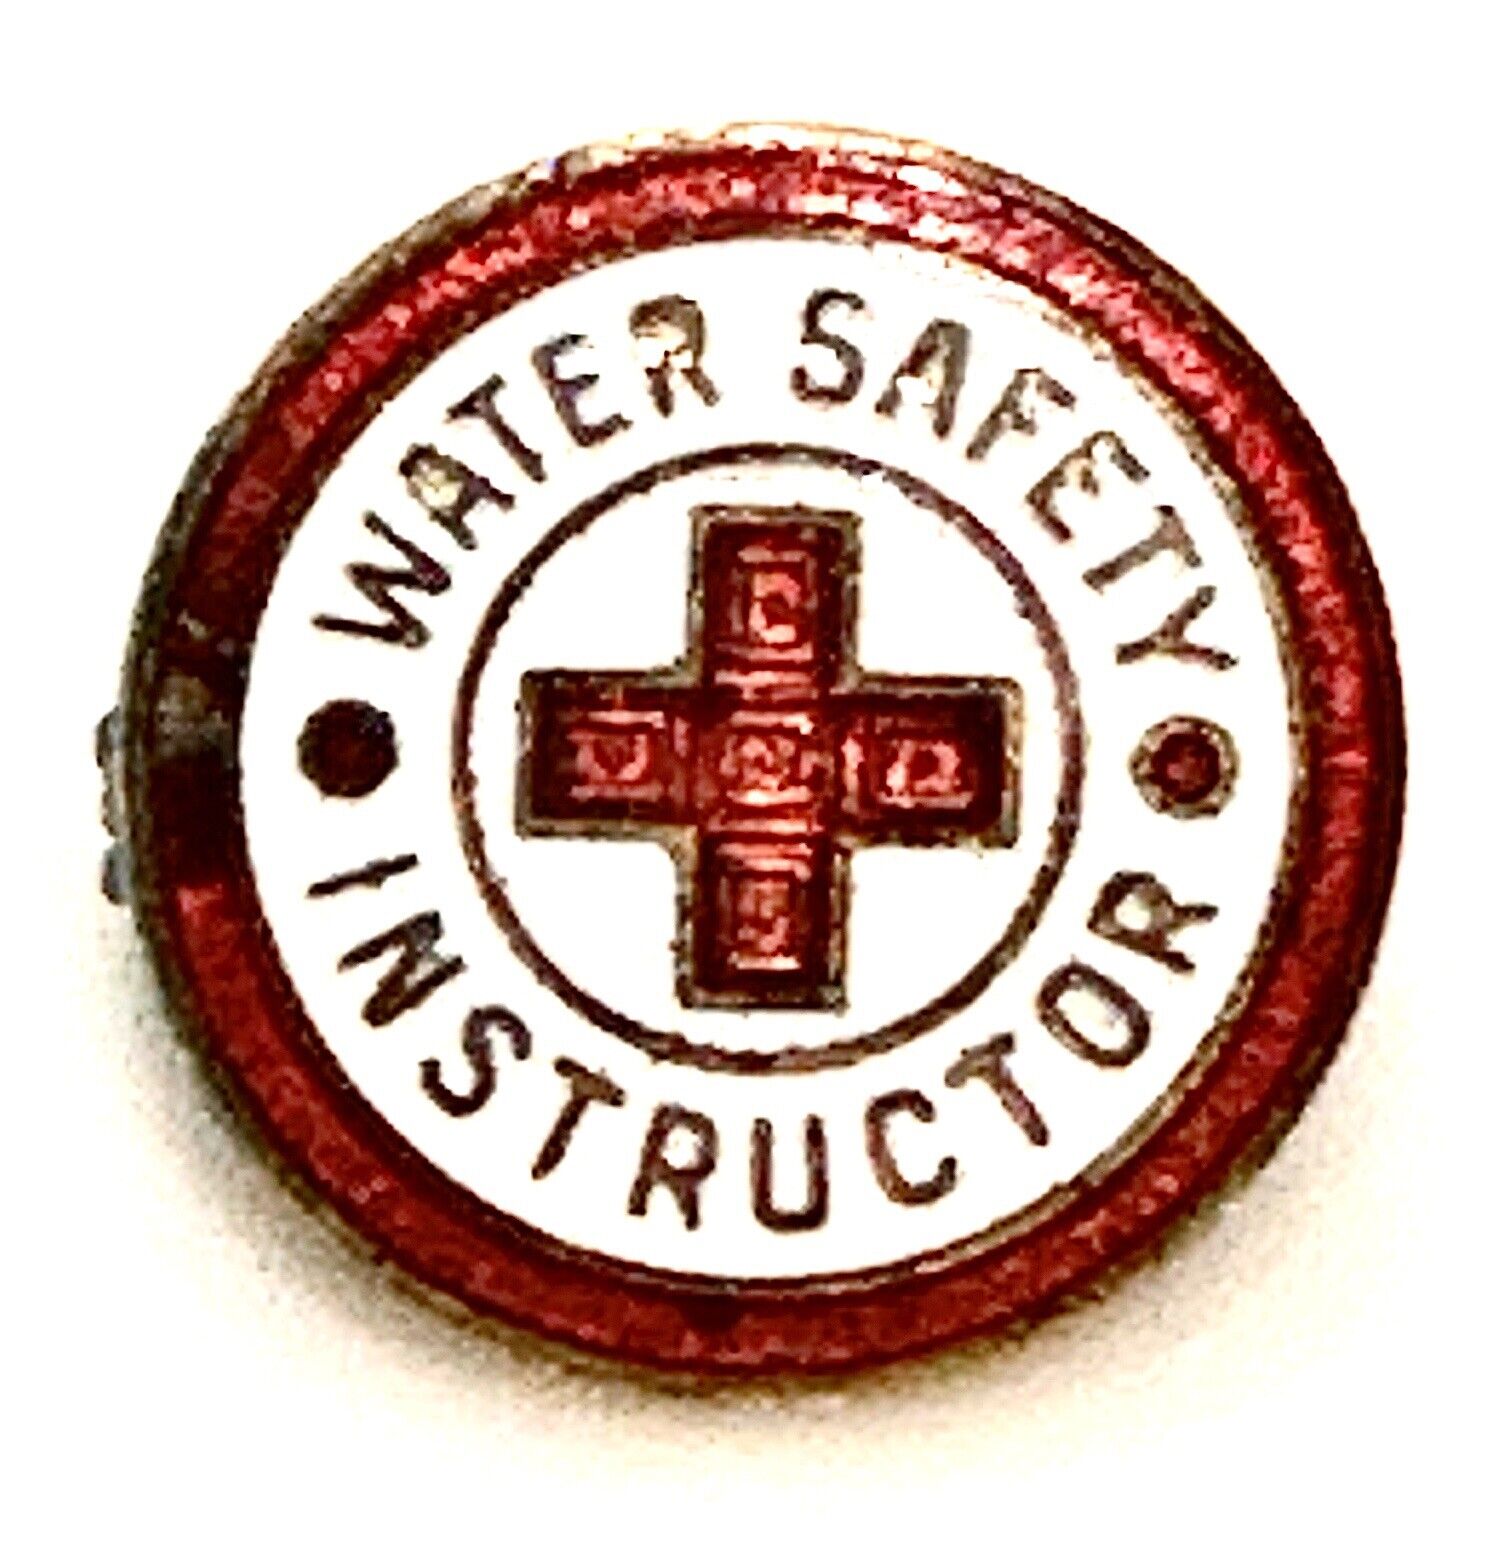 Vintage 1940s-50s American Red Cross Water Safety Instructor Pin, 1cm Diameter